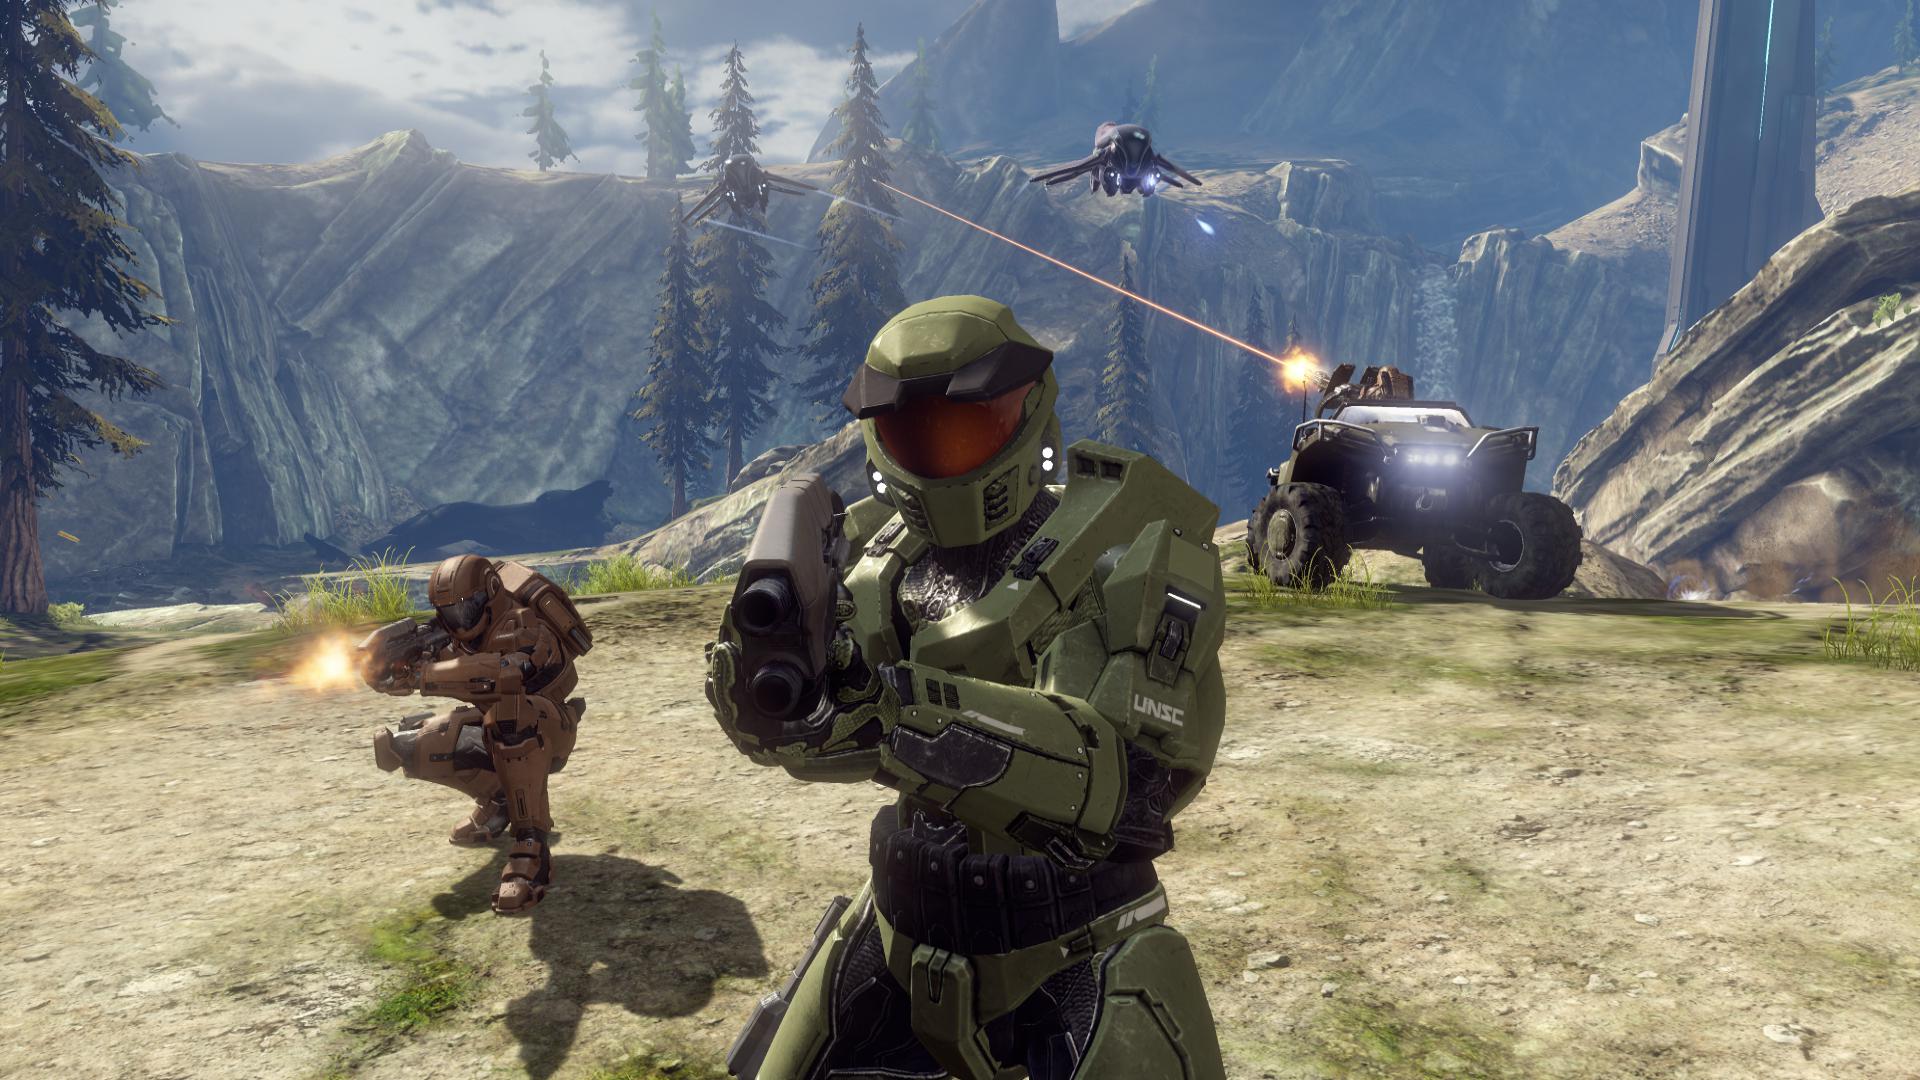 Halo: Combat Evolved is released